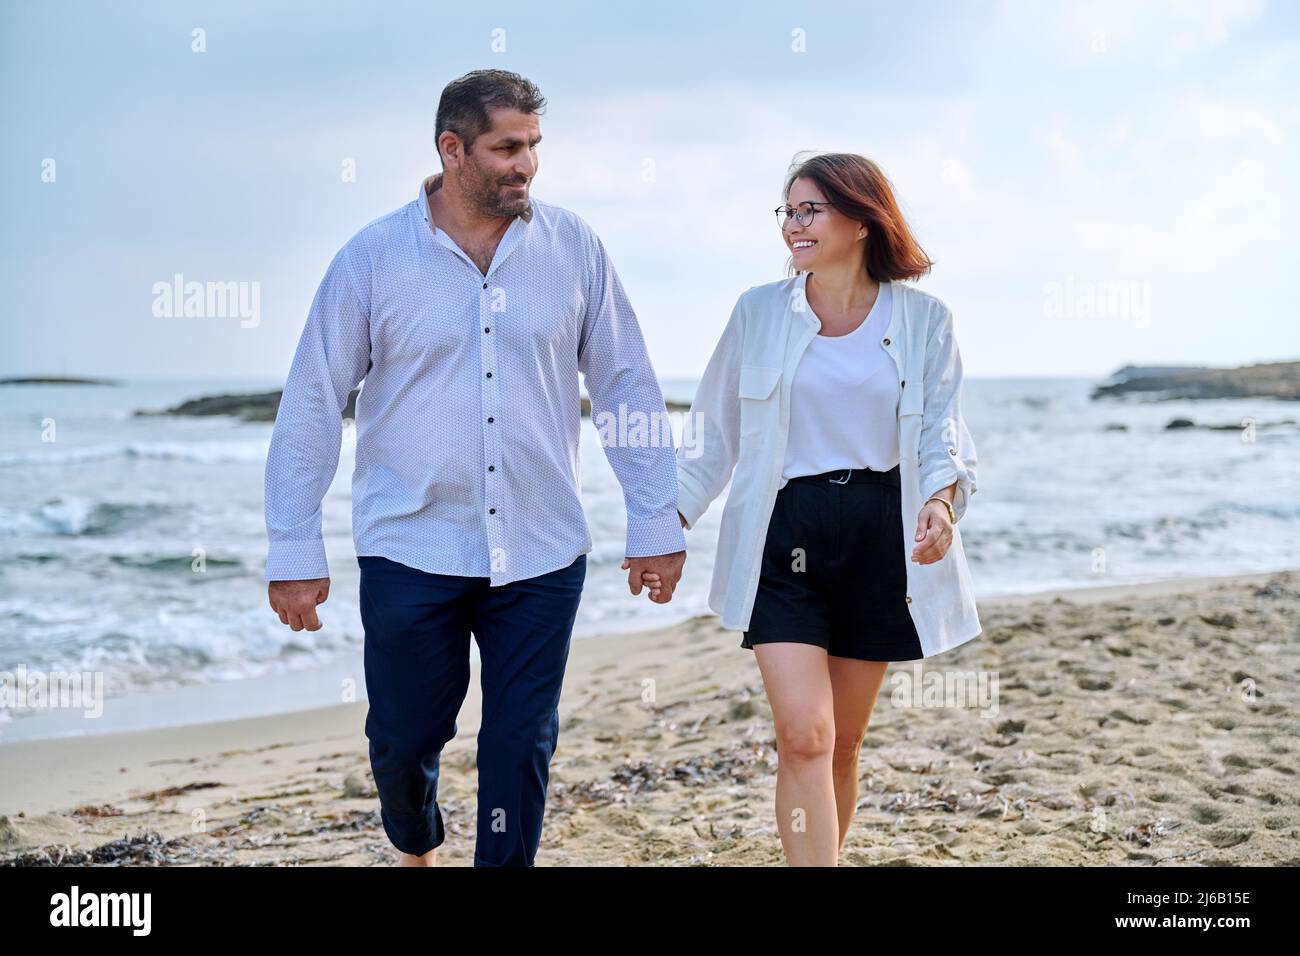 Happy middle-aged couple walking together on the beach. Stock Photo